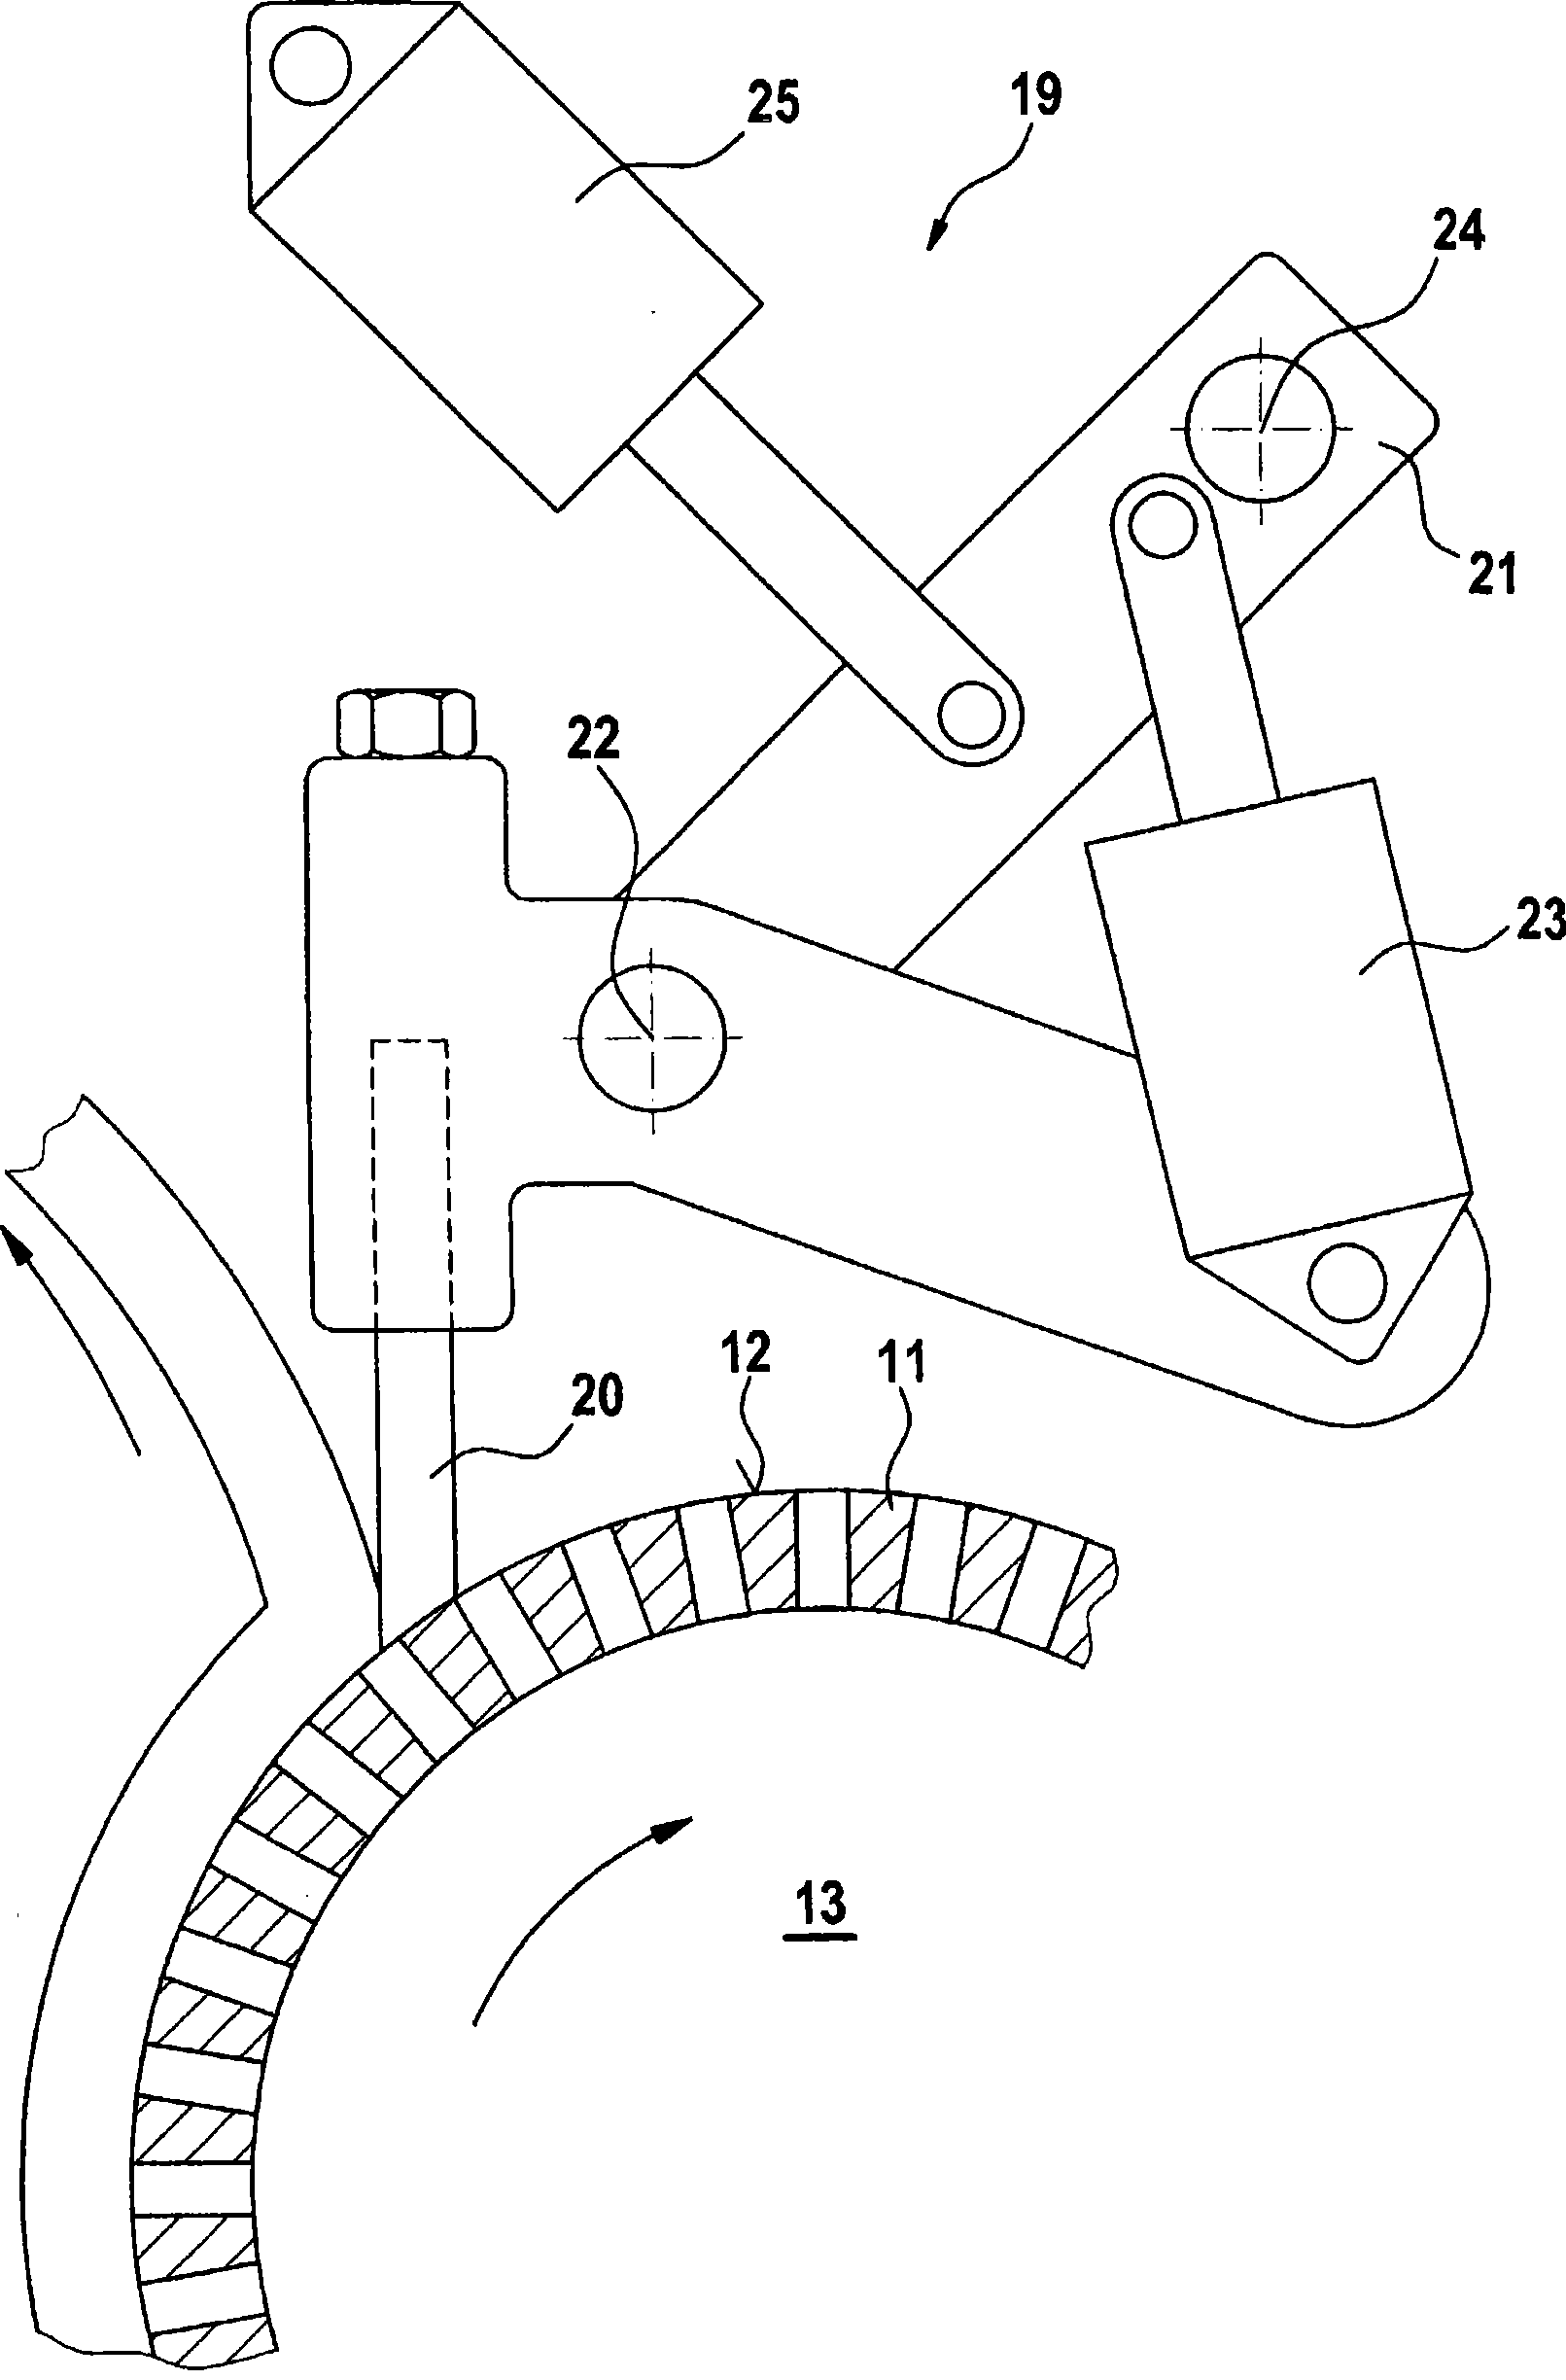 Apparatus and method for separating mixed materials of different flowability